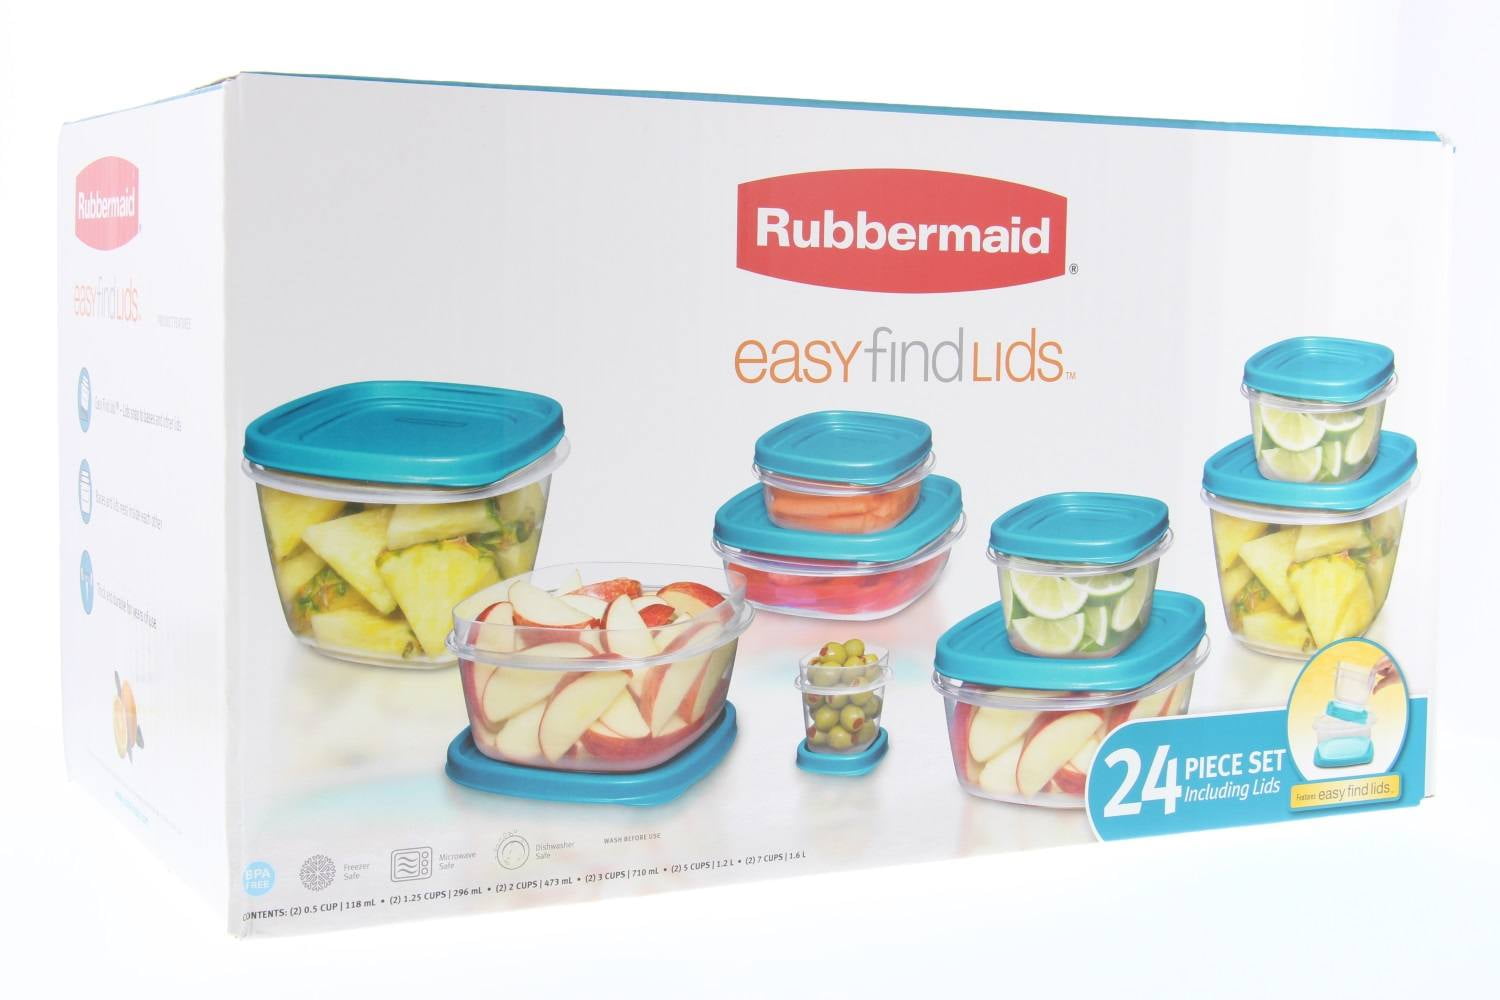  Rubbermaid No Stain Containers